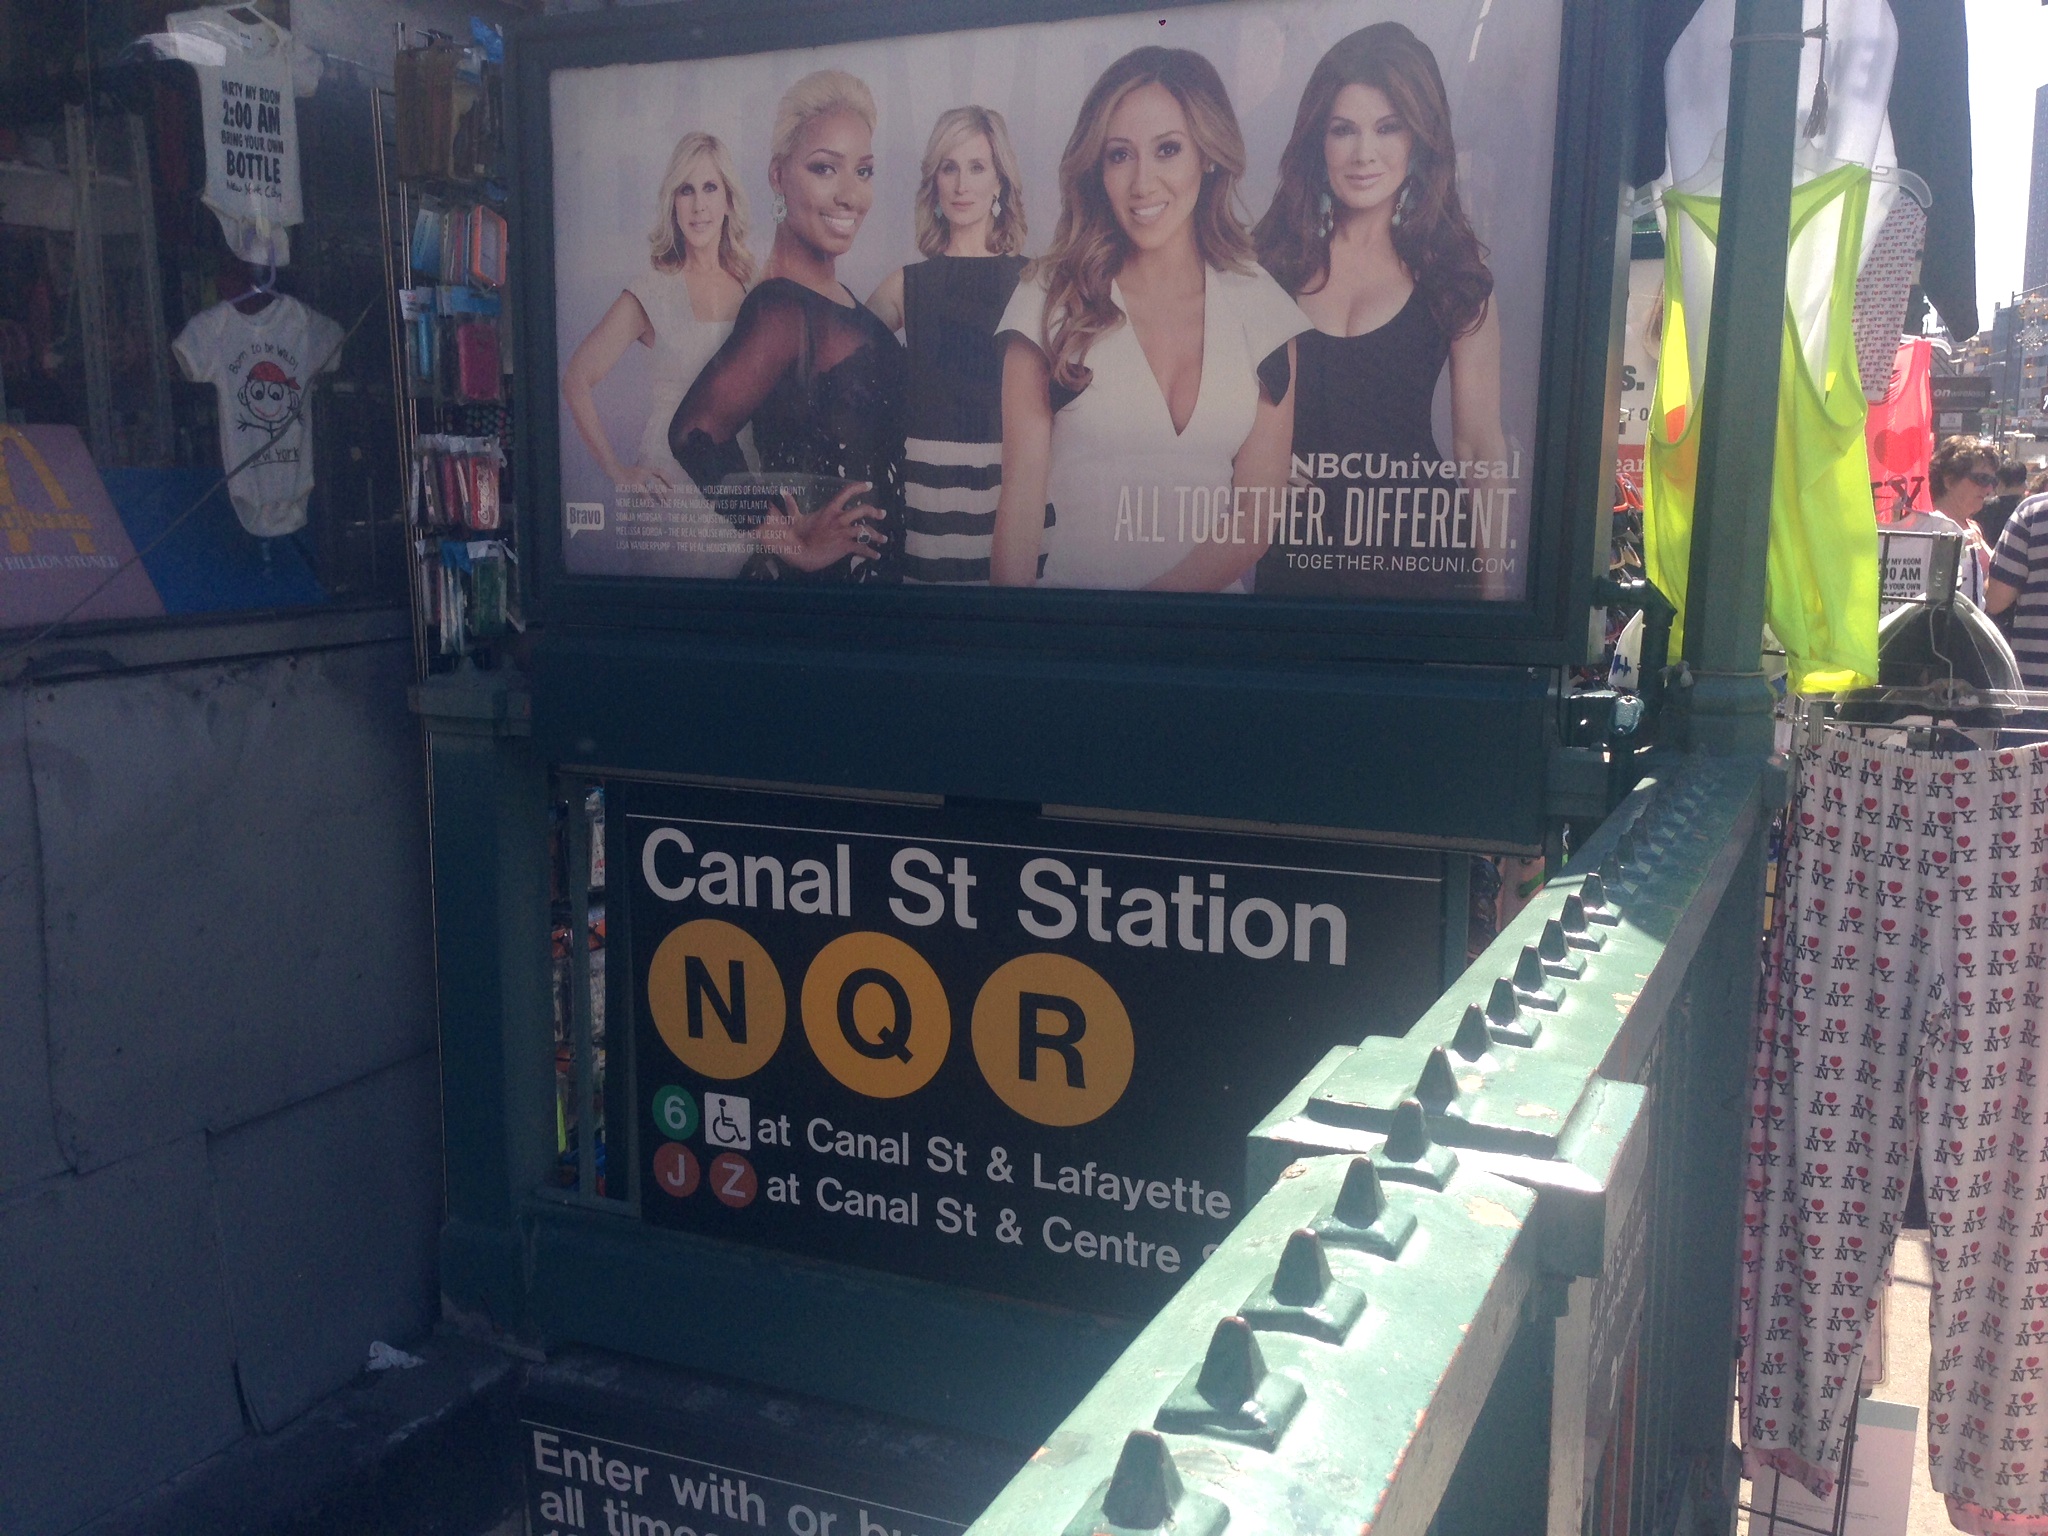 Sonja Morgan as top five favorite housewives on Canal subway advertisement.